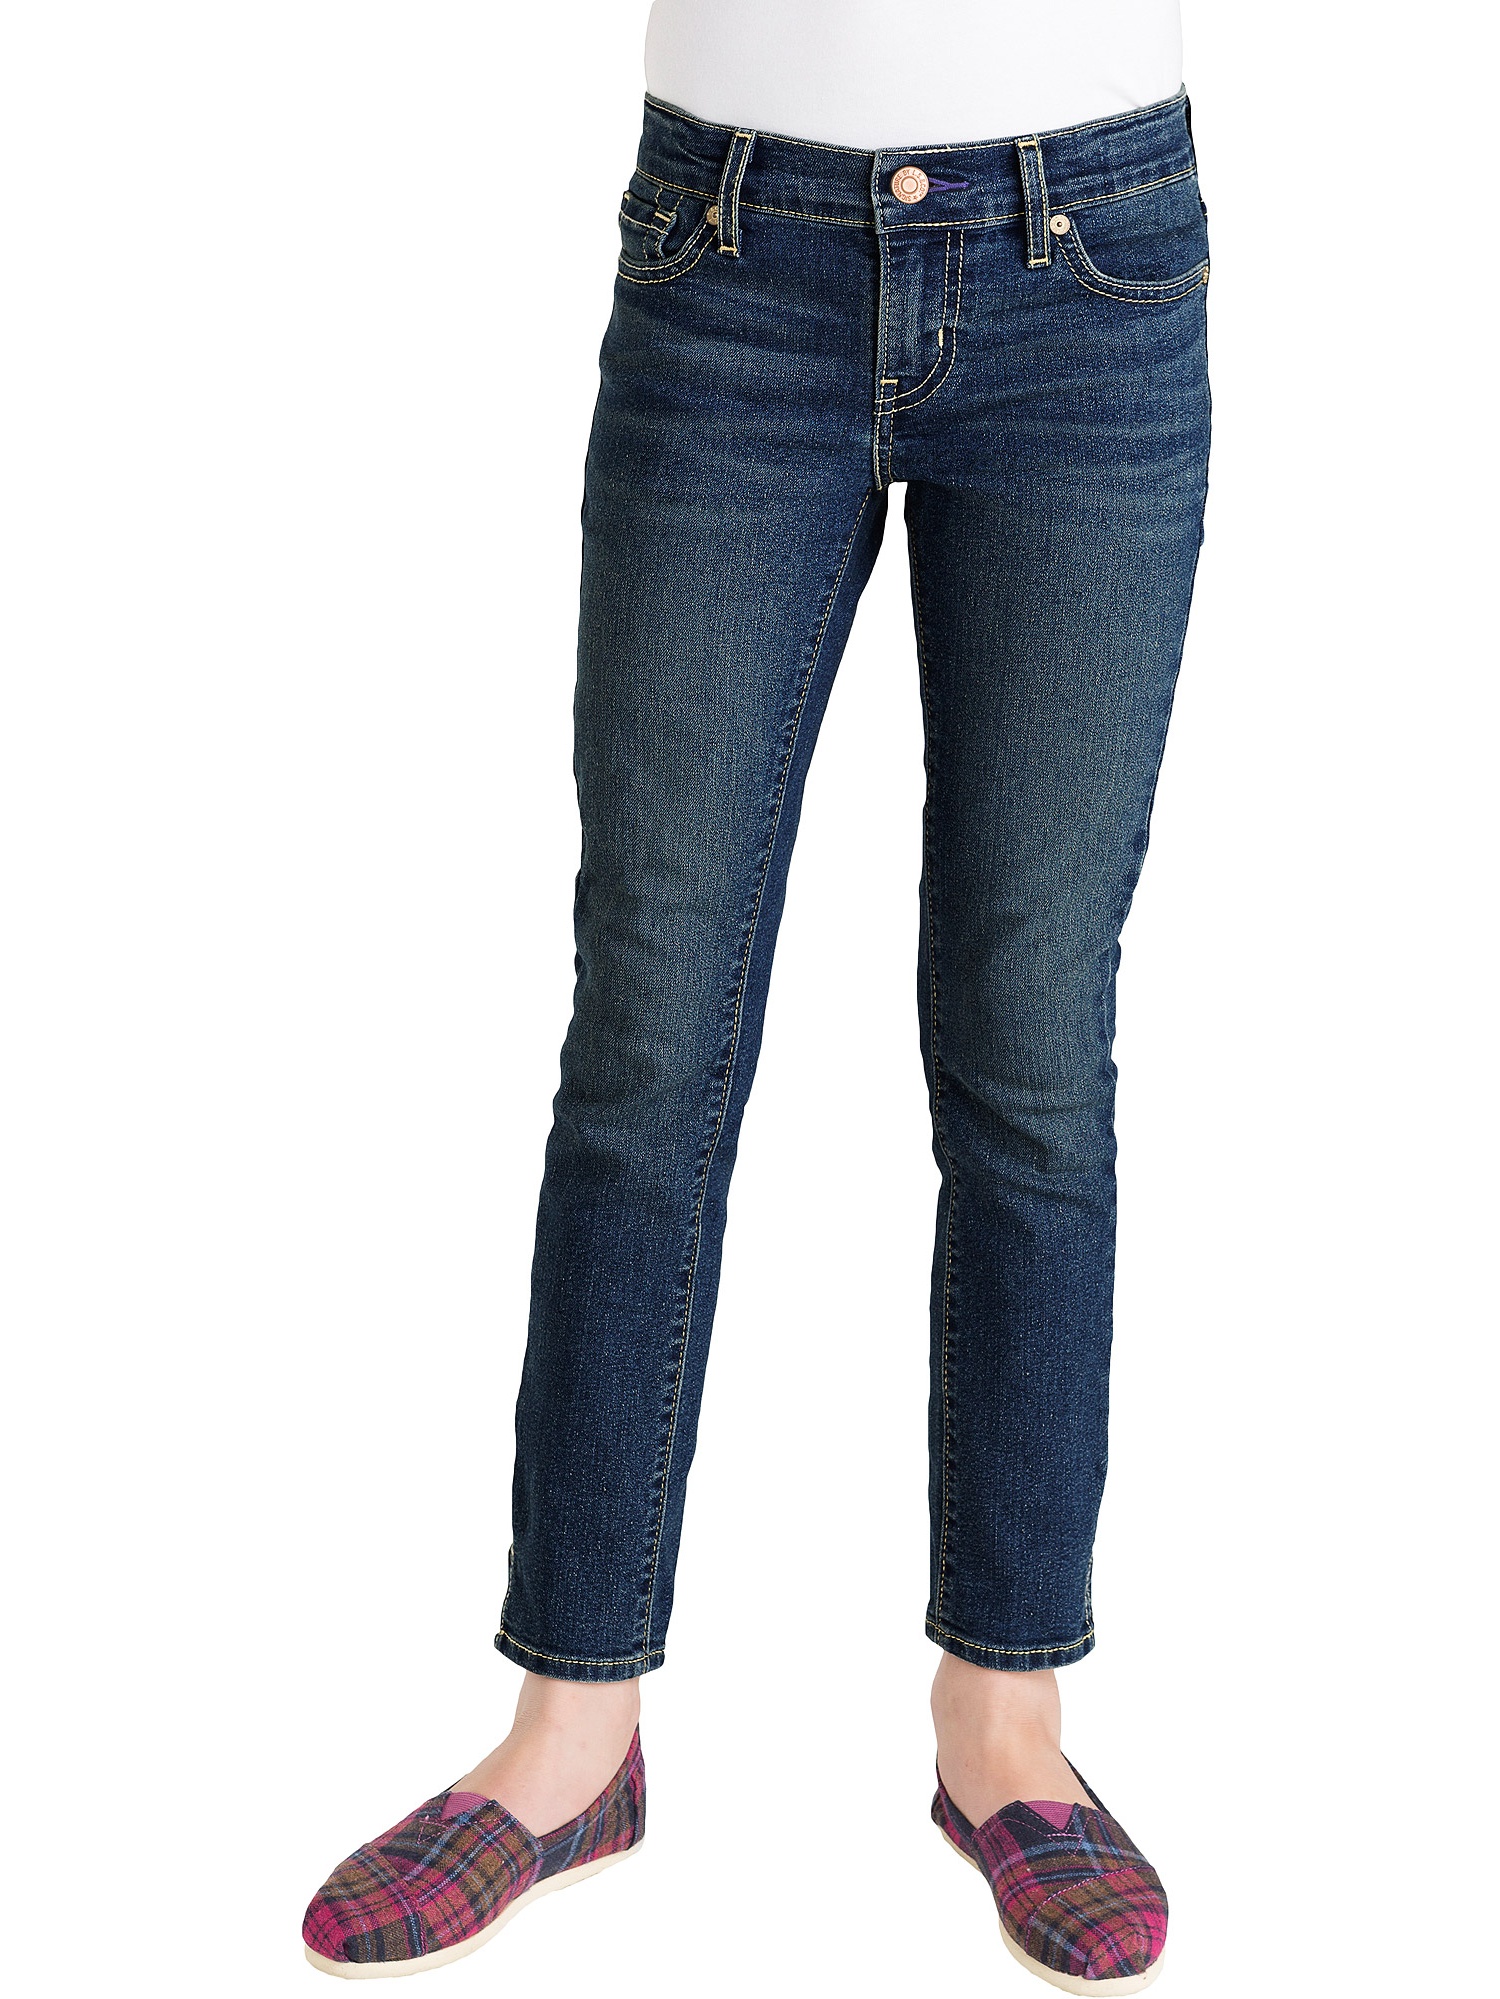 Signature By Levi Levi's Ankle Skinny W/flap Pkt Jean - image 1 of 3